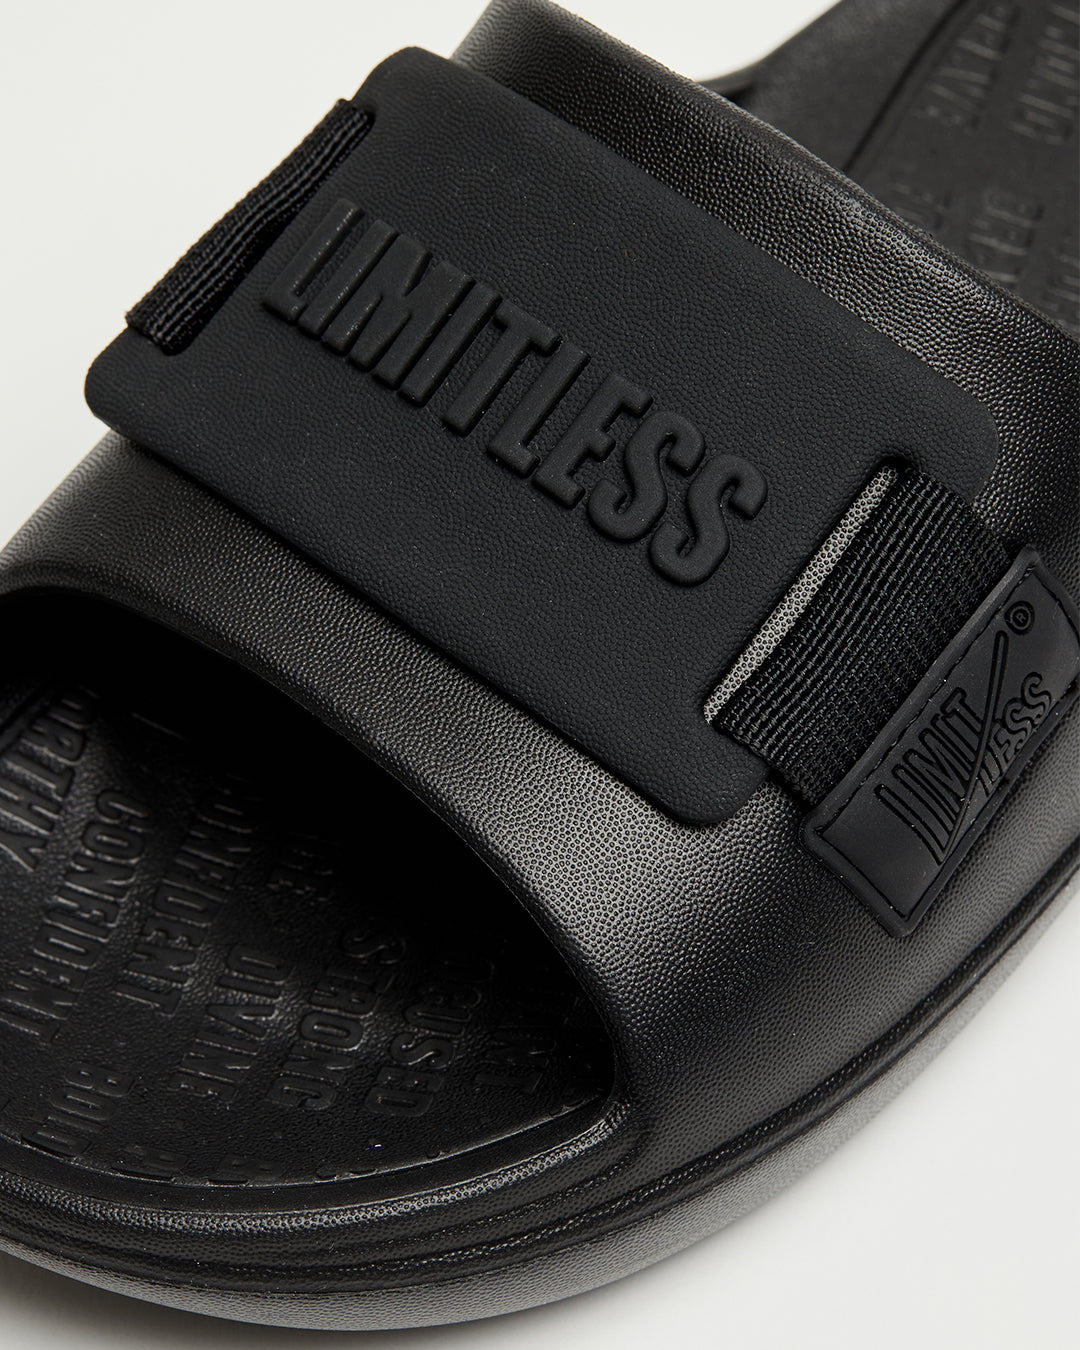 LIMITLESS SLIDES™ WITH ESSENTIAL TIBAH™ QUAD - MOORE HIGH SCHOOL EDITION